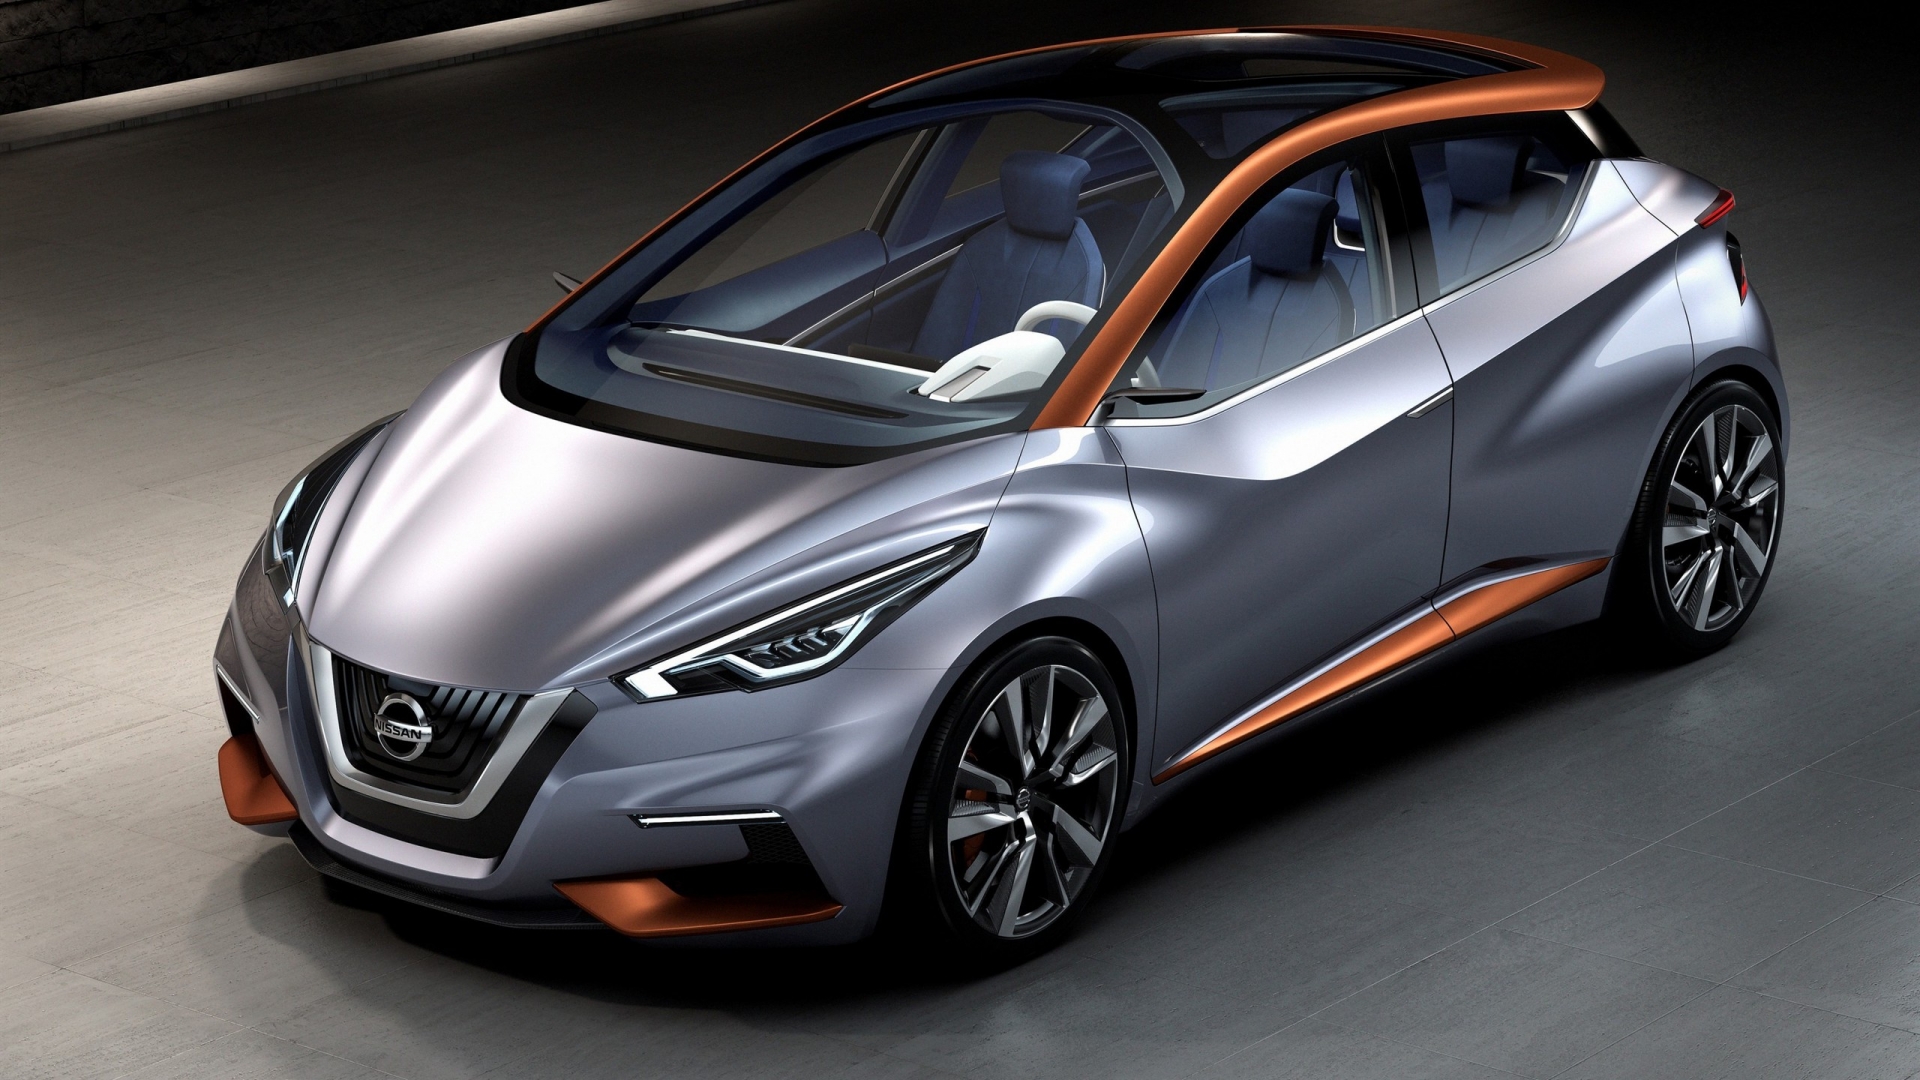 2015 Nissan Sway Concept for 1920 x 1080 HDTV 1080p resolution